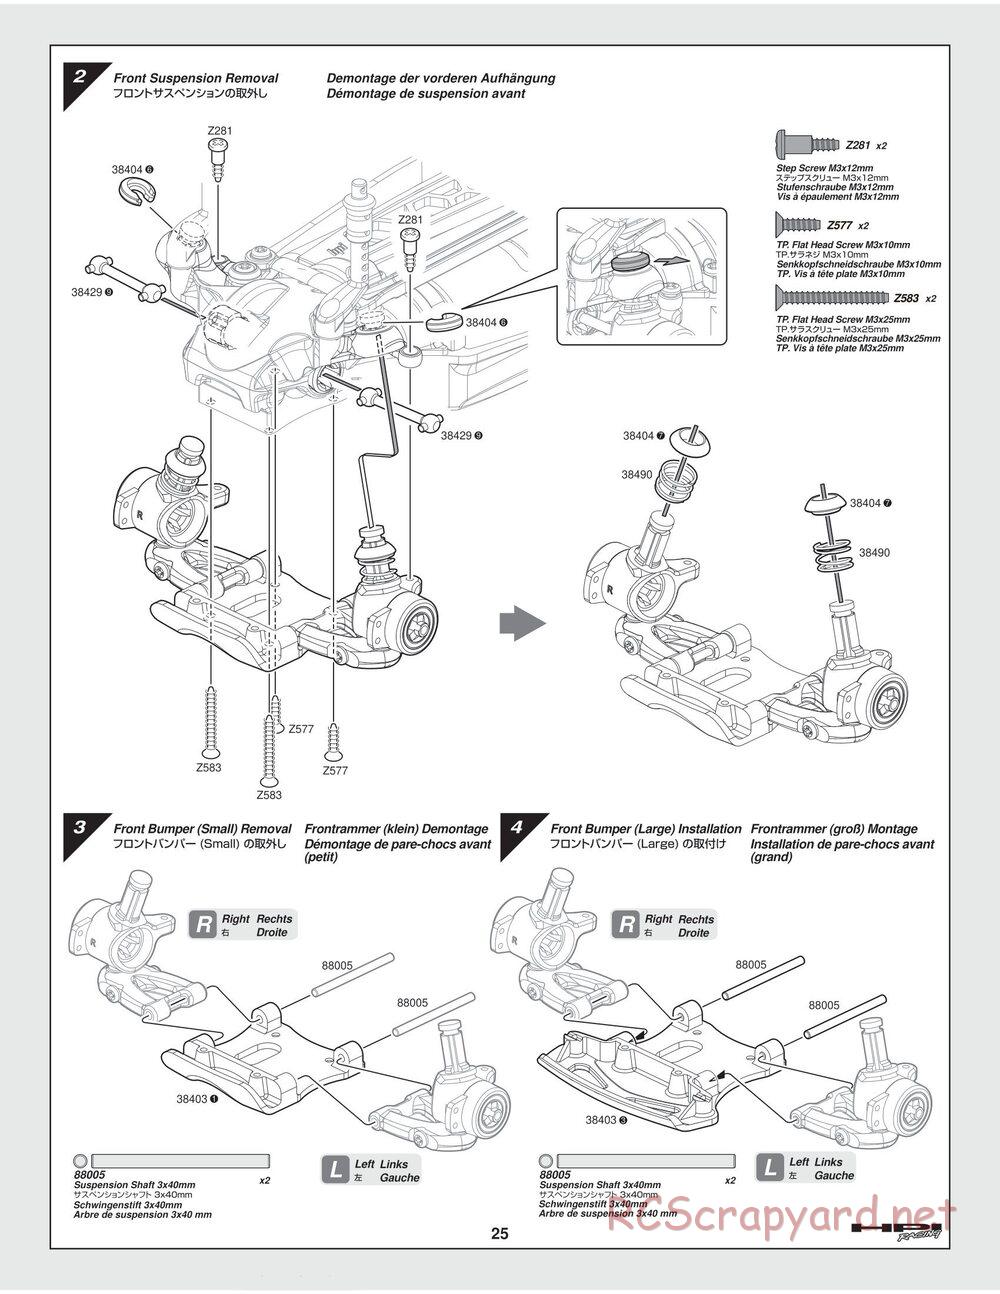 HPI - Switch - Manual - Page 25